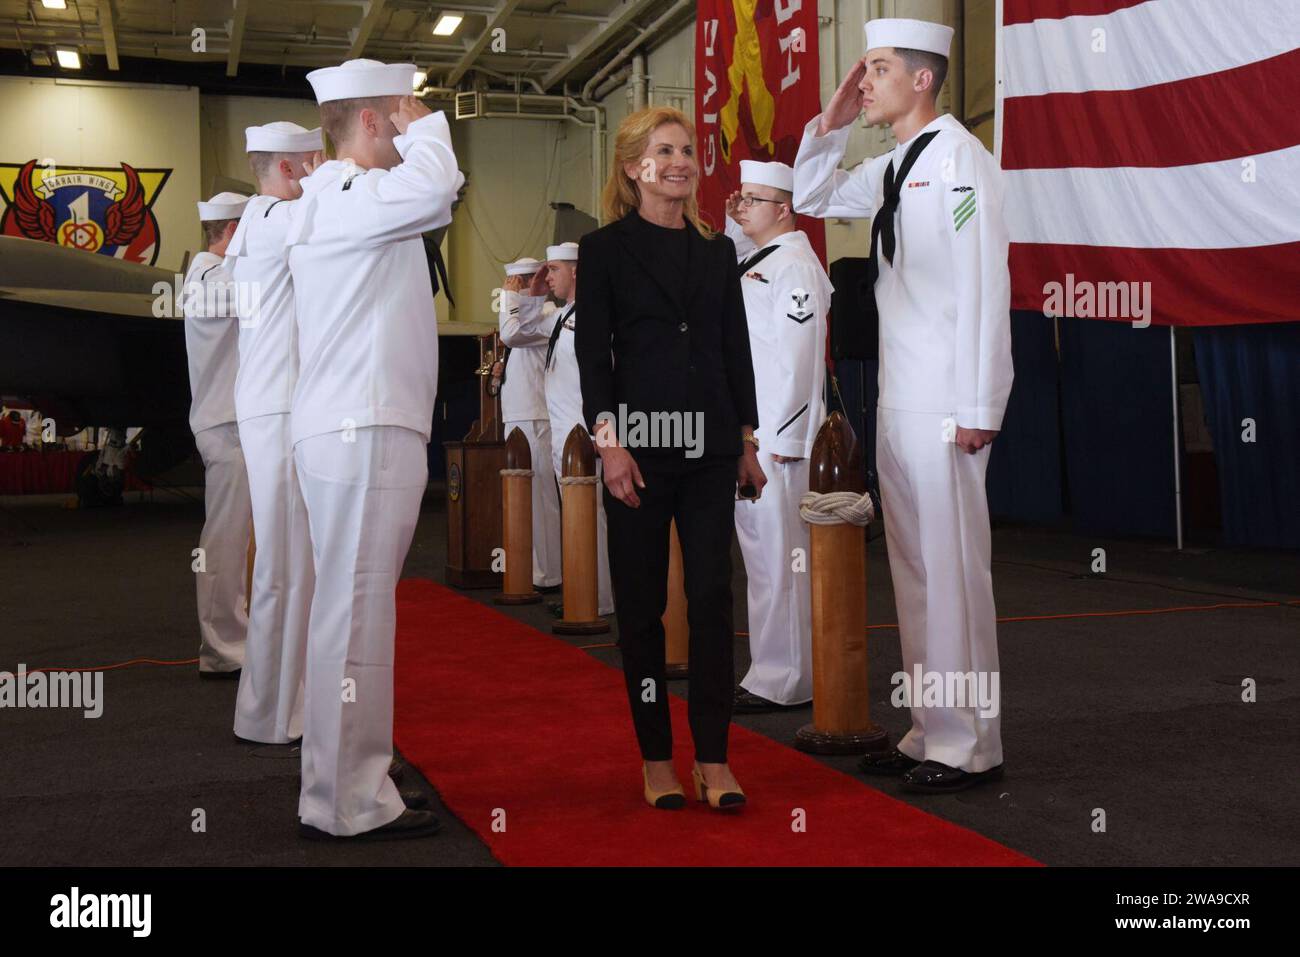 US military forces. 180623PE636-0141 MARSEILLE, France (June 23, 2018) Ambassador Jamie D. McCourt, U.S. Ambassador to the French Republic and Principality of Monaco receives side-boy honors during a reception aboard the Nimitz-class aircraft carrier USS Harry S. Truman (CVN 75). Truman is currently deployed as part of an ongoing rotation of U.S. forces supporting maritime security operations in international waters around the globe. (U.S. Navy photo by Mass Communication Specialist 2nd Class Anthony Flynn/Released) Stock Photo